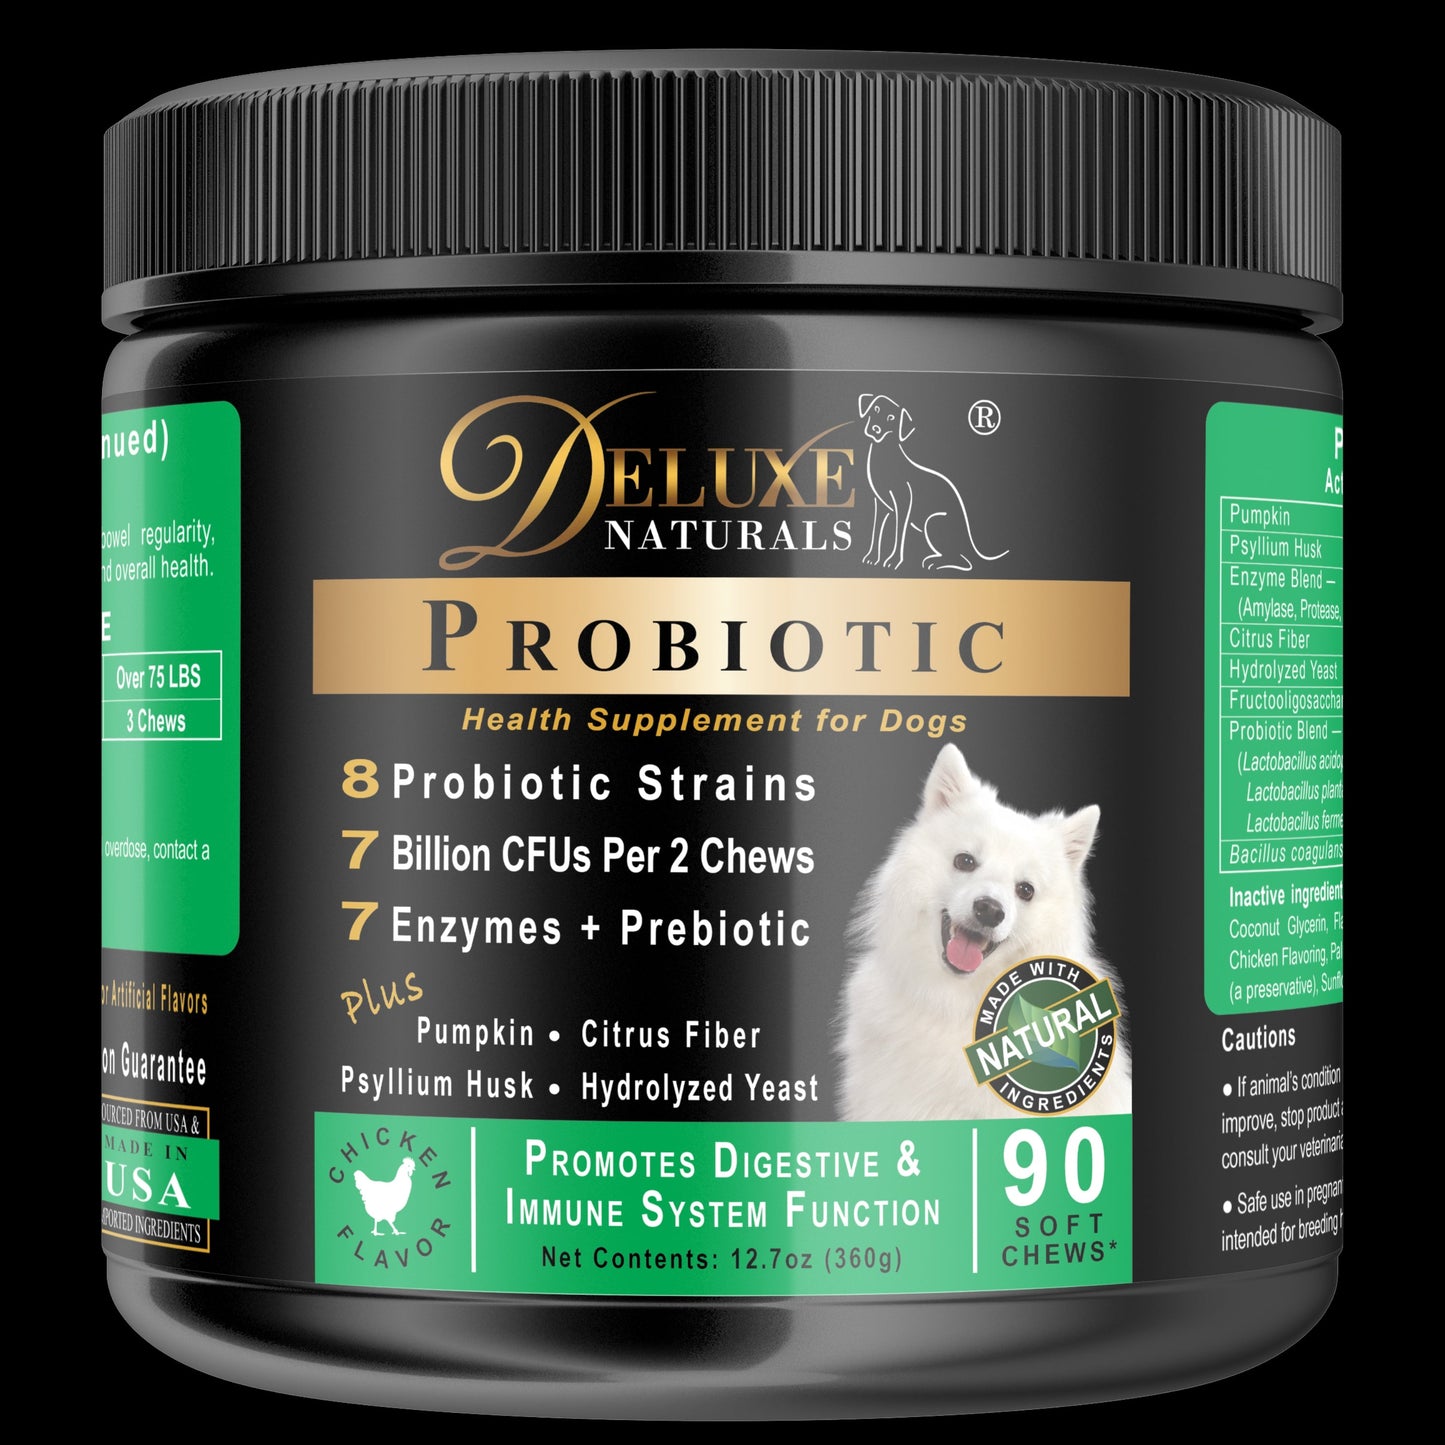 Deluxe Naturals Probiotic Soft Chews for Dogs - 270 Count (Pack of 3 x 90ct)